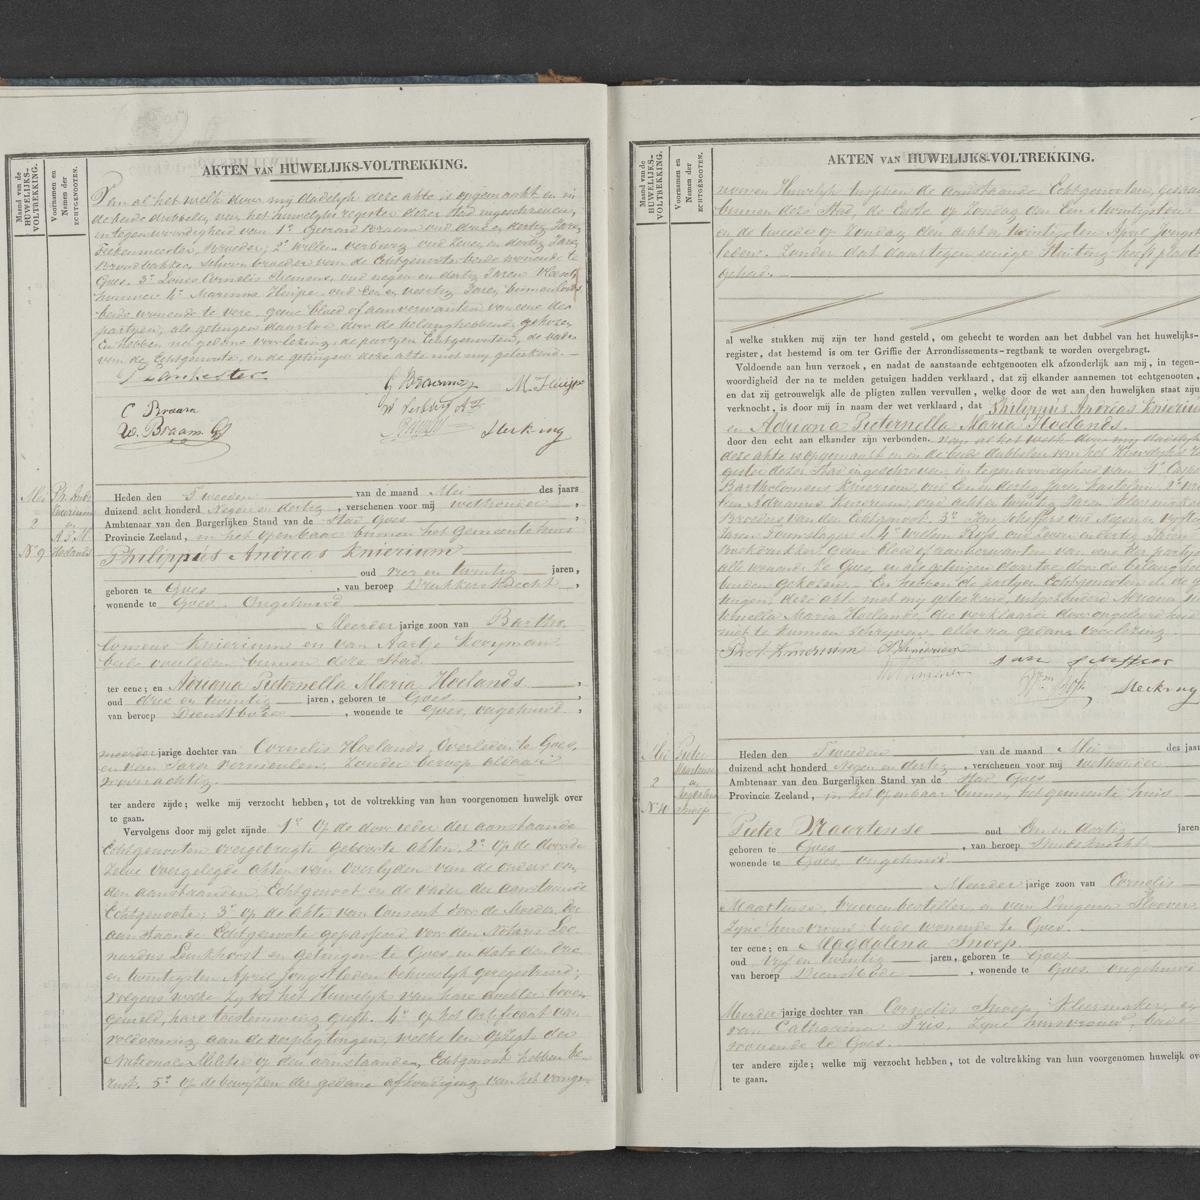 Civil registry of marriages, Goes, 1839, records 8-10